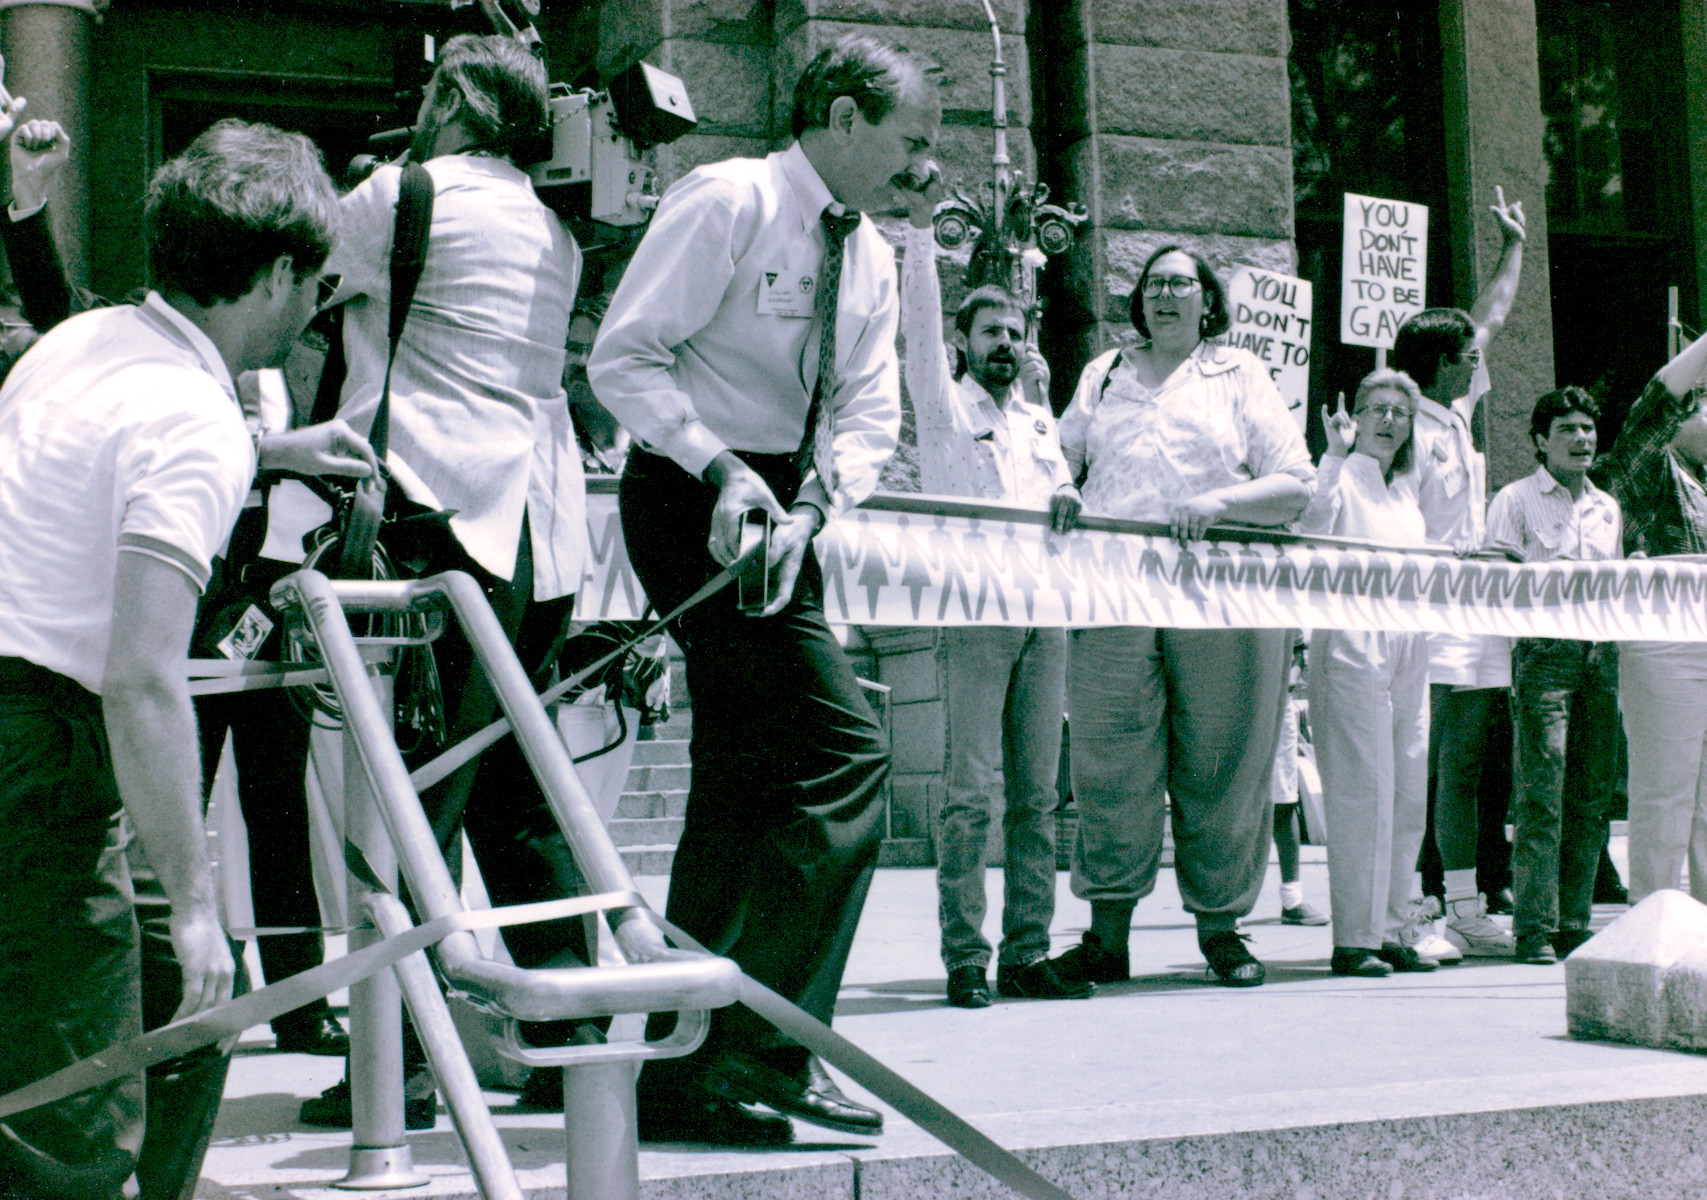 William wrapping the Texas Capitol in symbolic red tape during an AIDS demonstration in front of religious protestors, Austin, TX, circa 1987. Photo courtesy of William Waybourn. 